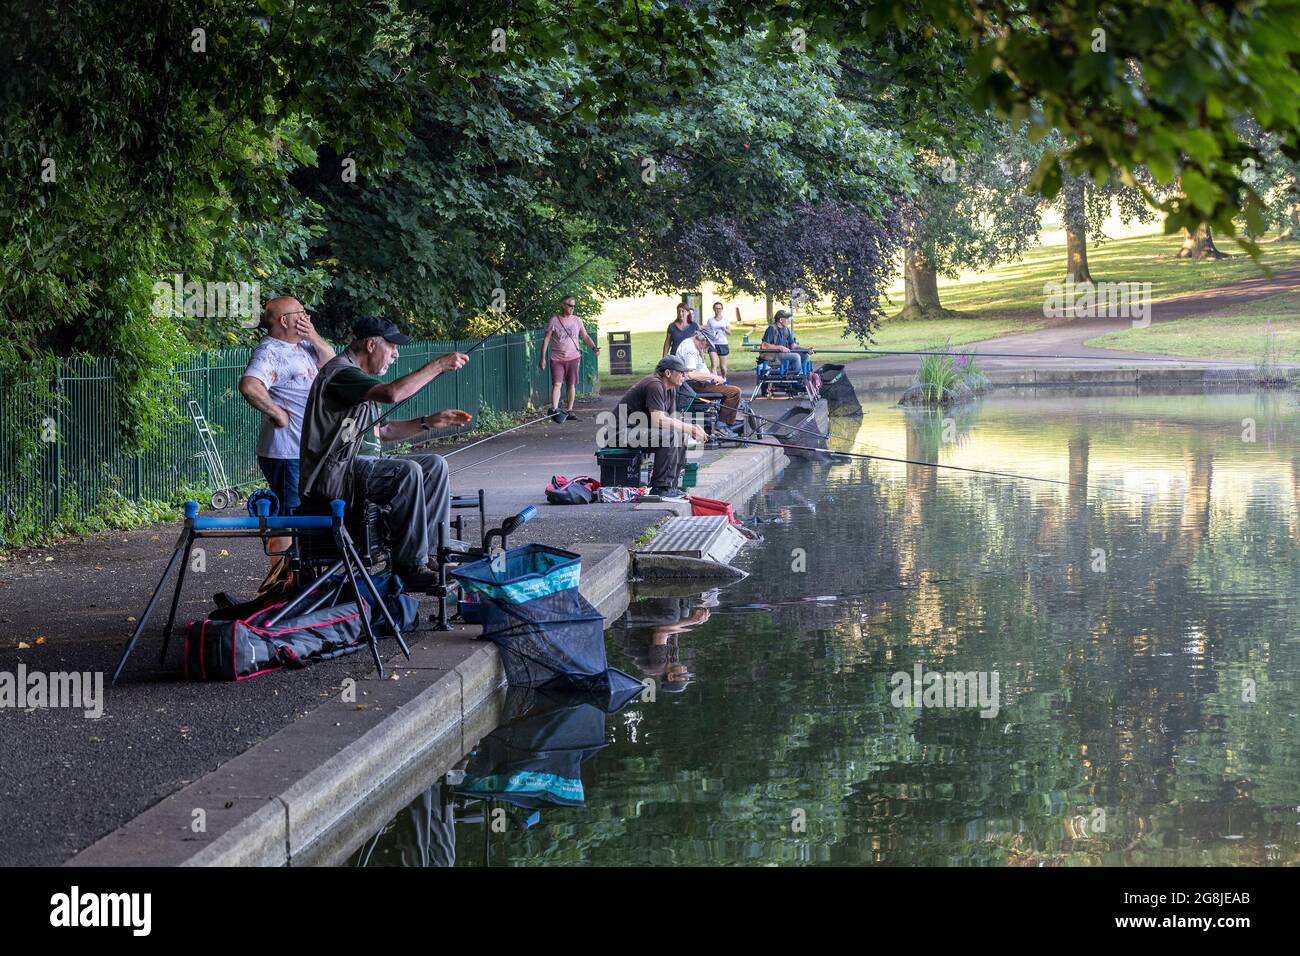 Northampton, UK. Weather, 21st July 202. Fishermen in the shade early morning in Abington Park, it’s going to be very humid after last nights thunder and rain. Credit: Keith J Smith./Alamy Live News Stock Photo